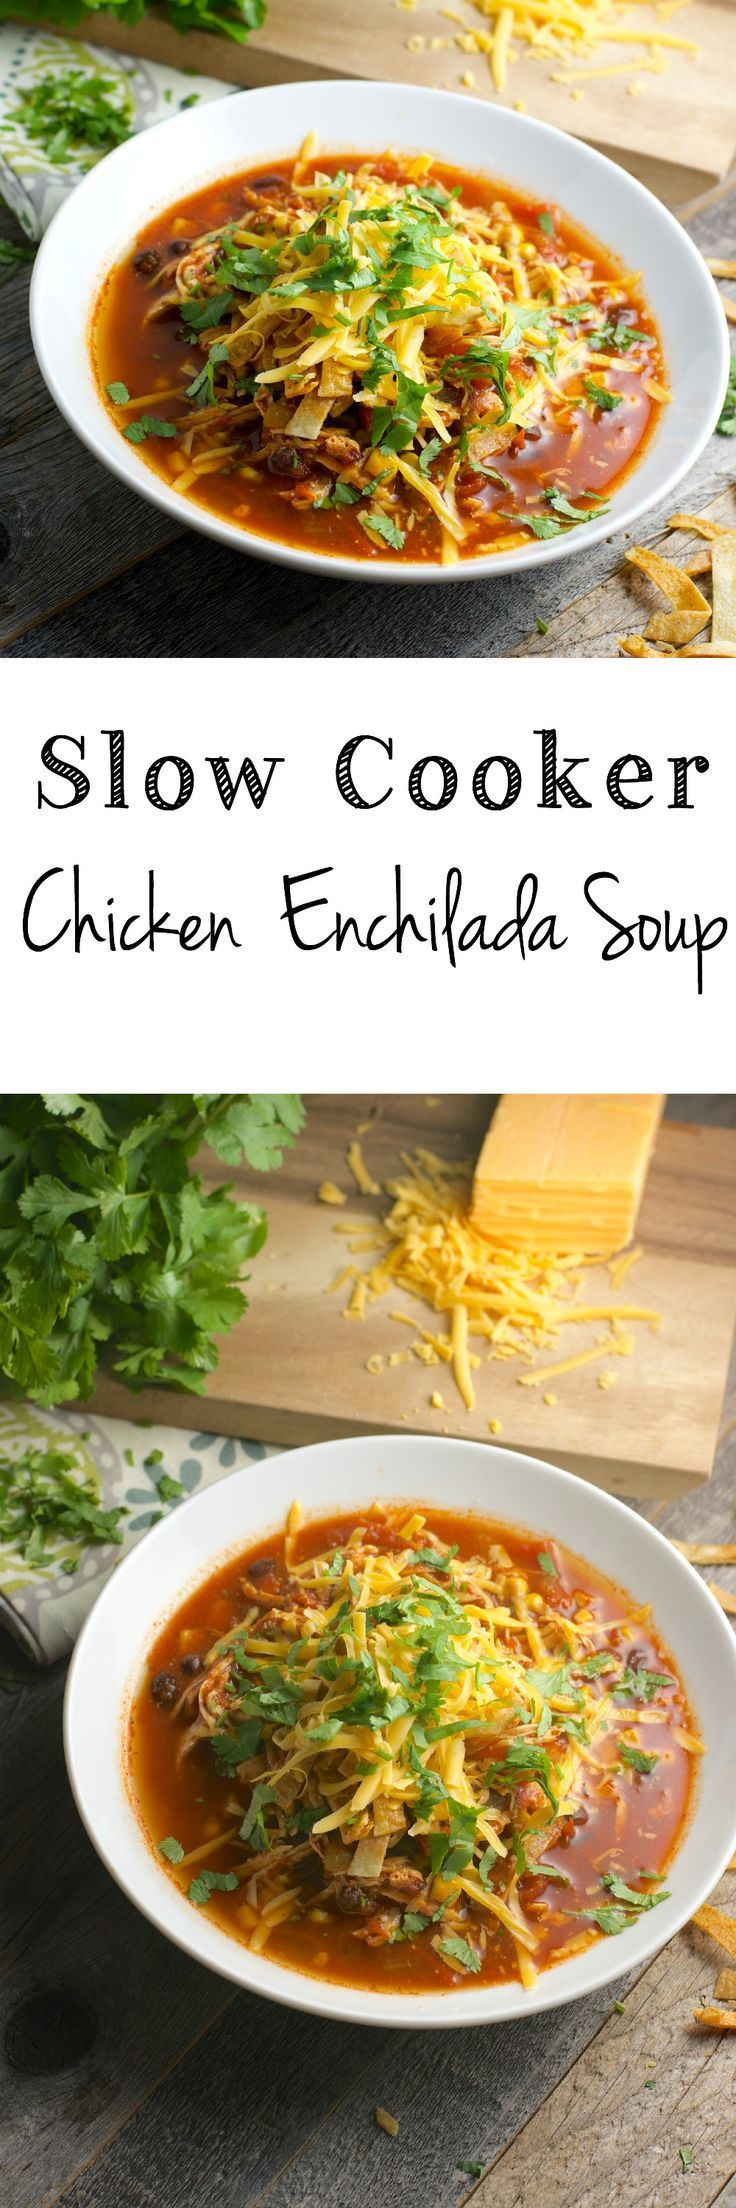 Healthy Crockpot Chicken Soup Recipes
 Slow Cooker Chicken Enchilada Soup Healthy easy and